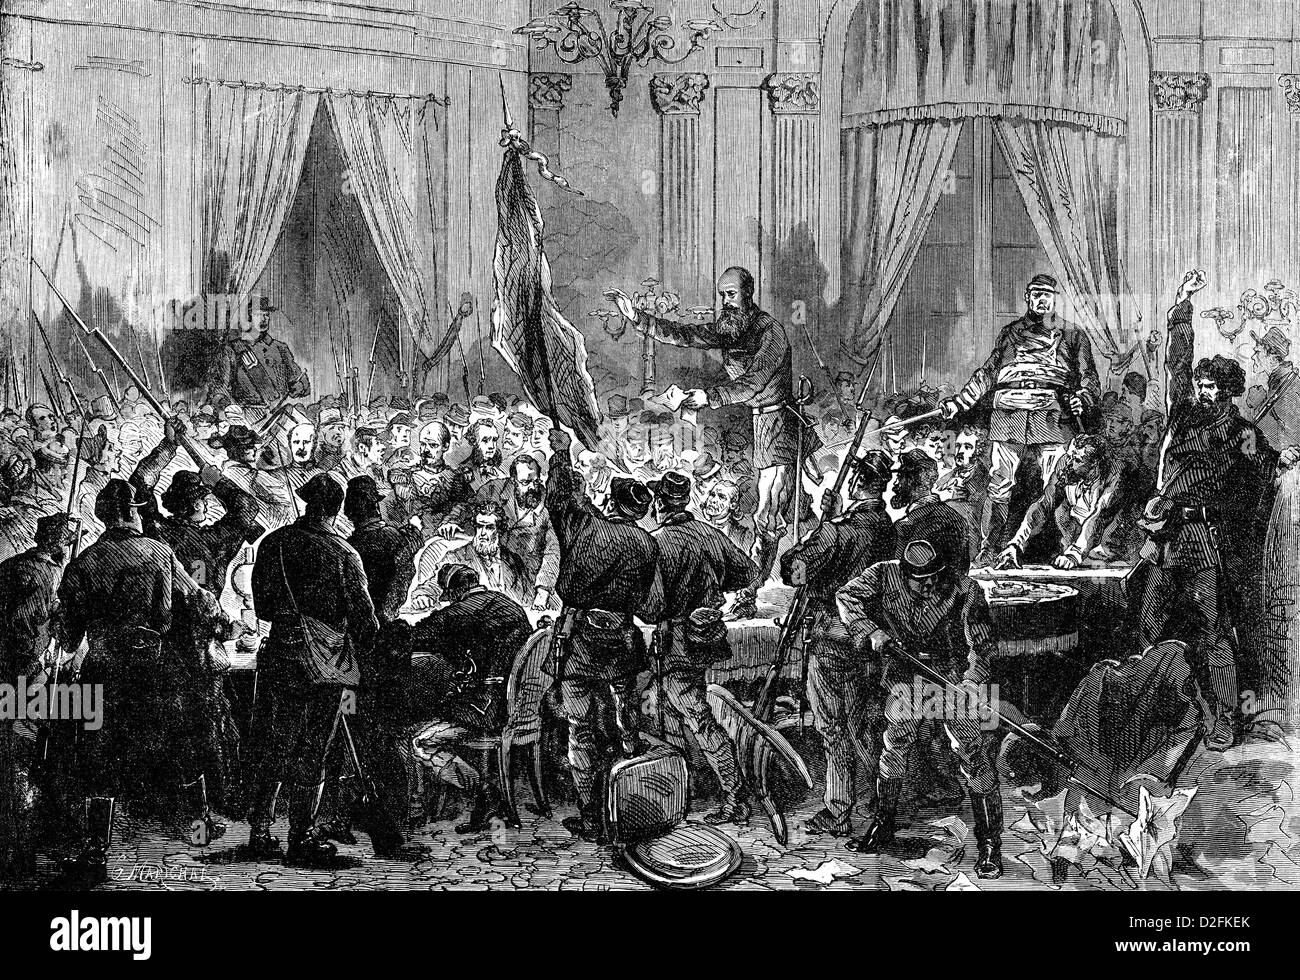 meeting room of the Government through the Paris Communards on 31 October 1870, Paris Paris Communards on, Paris, France, Europe Stock Photo